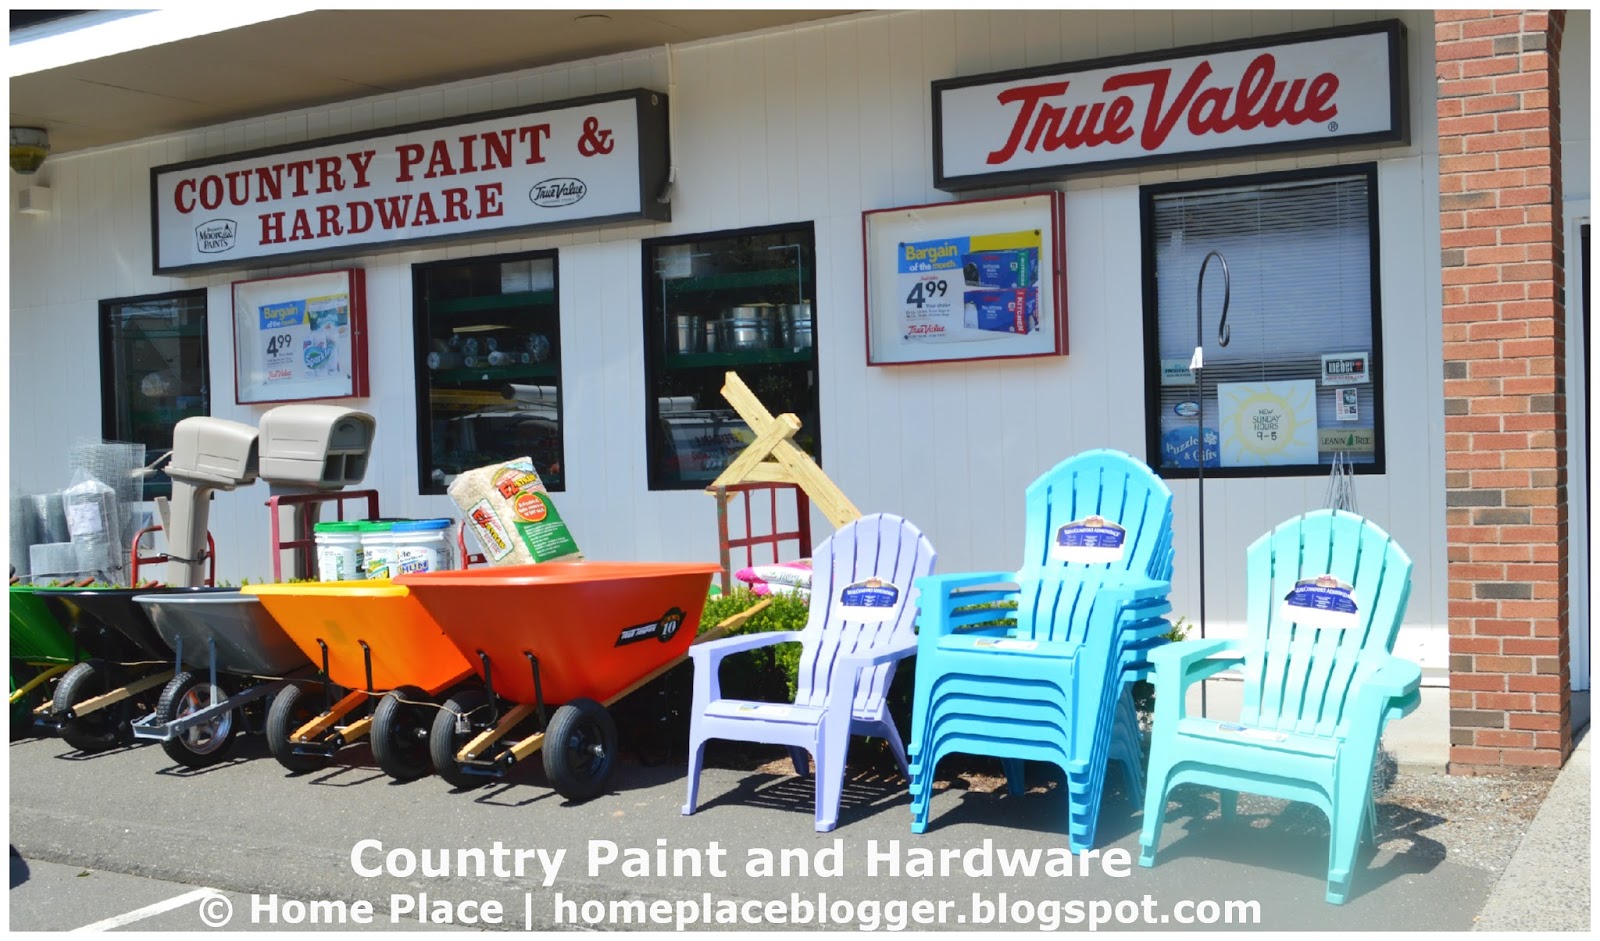 Home Place Cash Mob CT at Country Paint and Hardware in